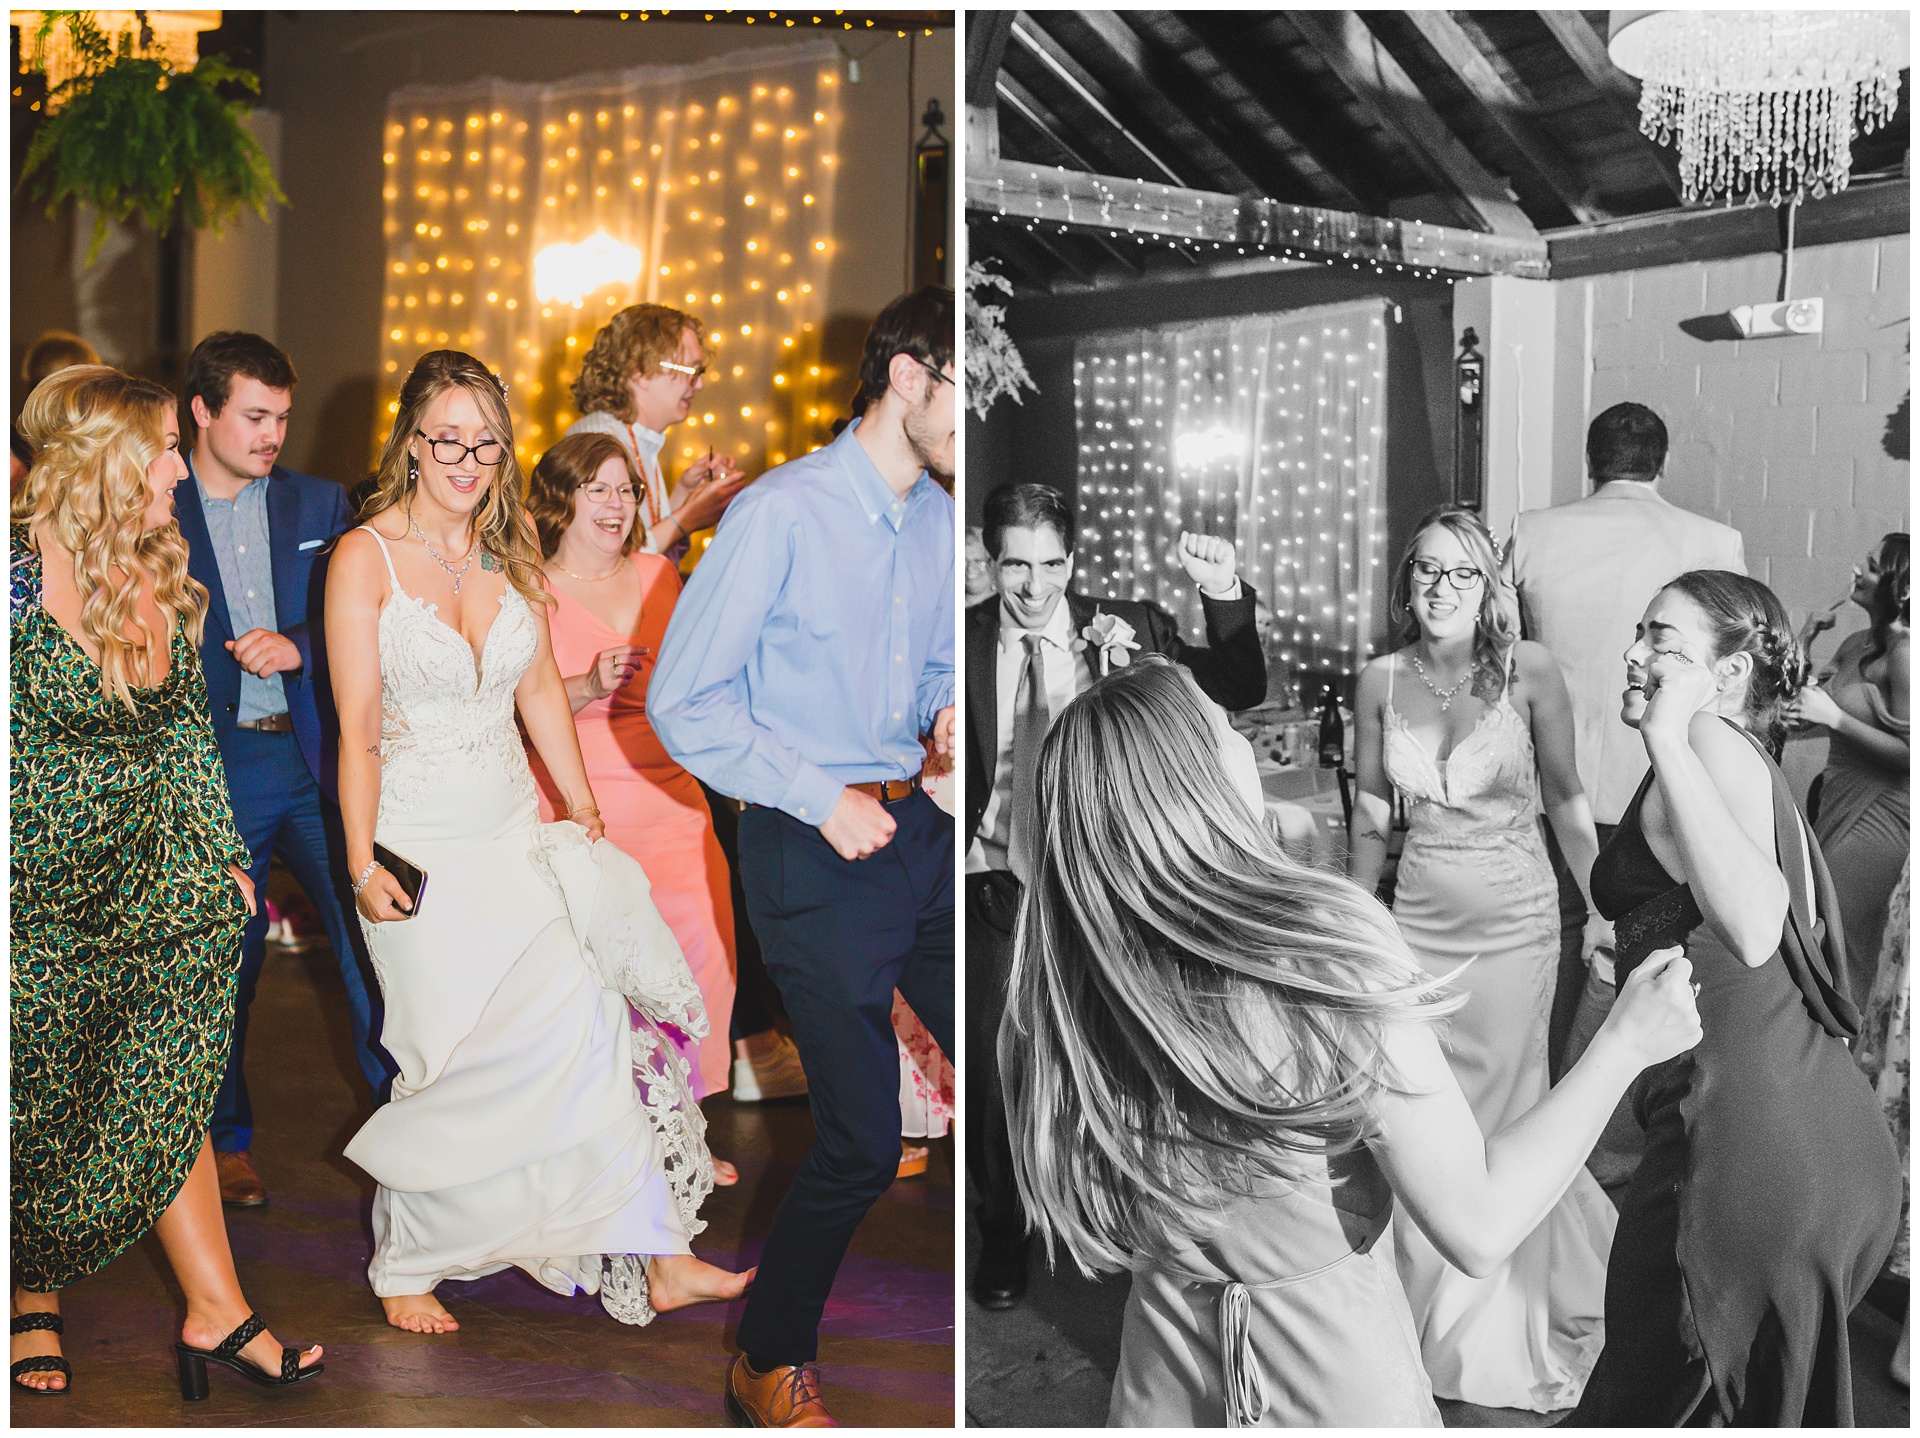 Wedding photography at The W Banquet Hall in Lawrence, Kansas, by Kansas City wedding photographers Wisdom-Watson Weddings.